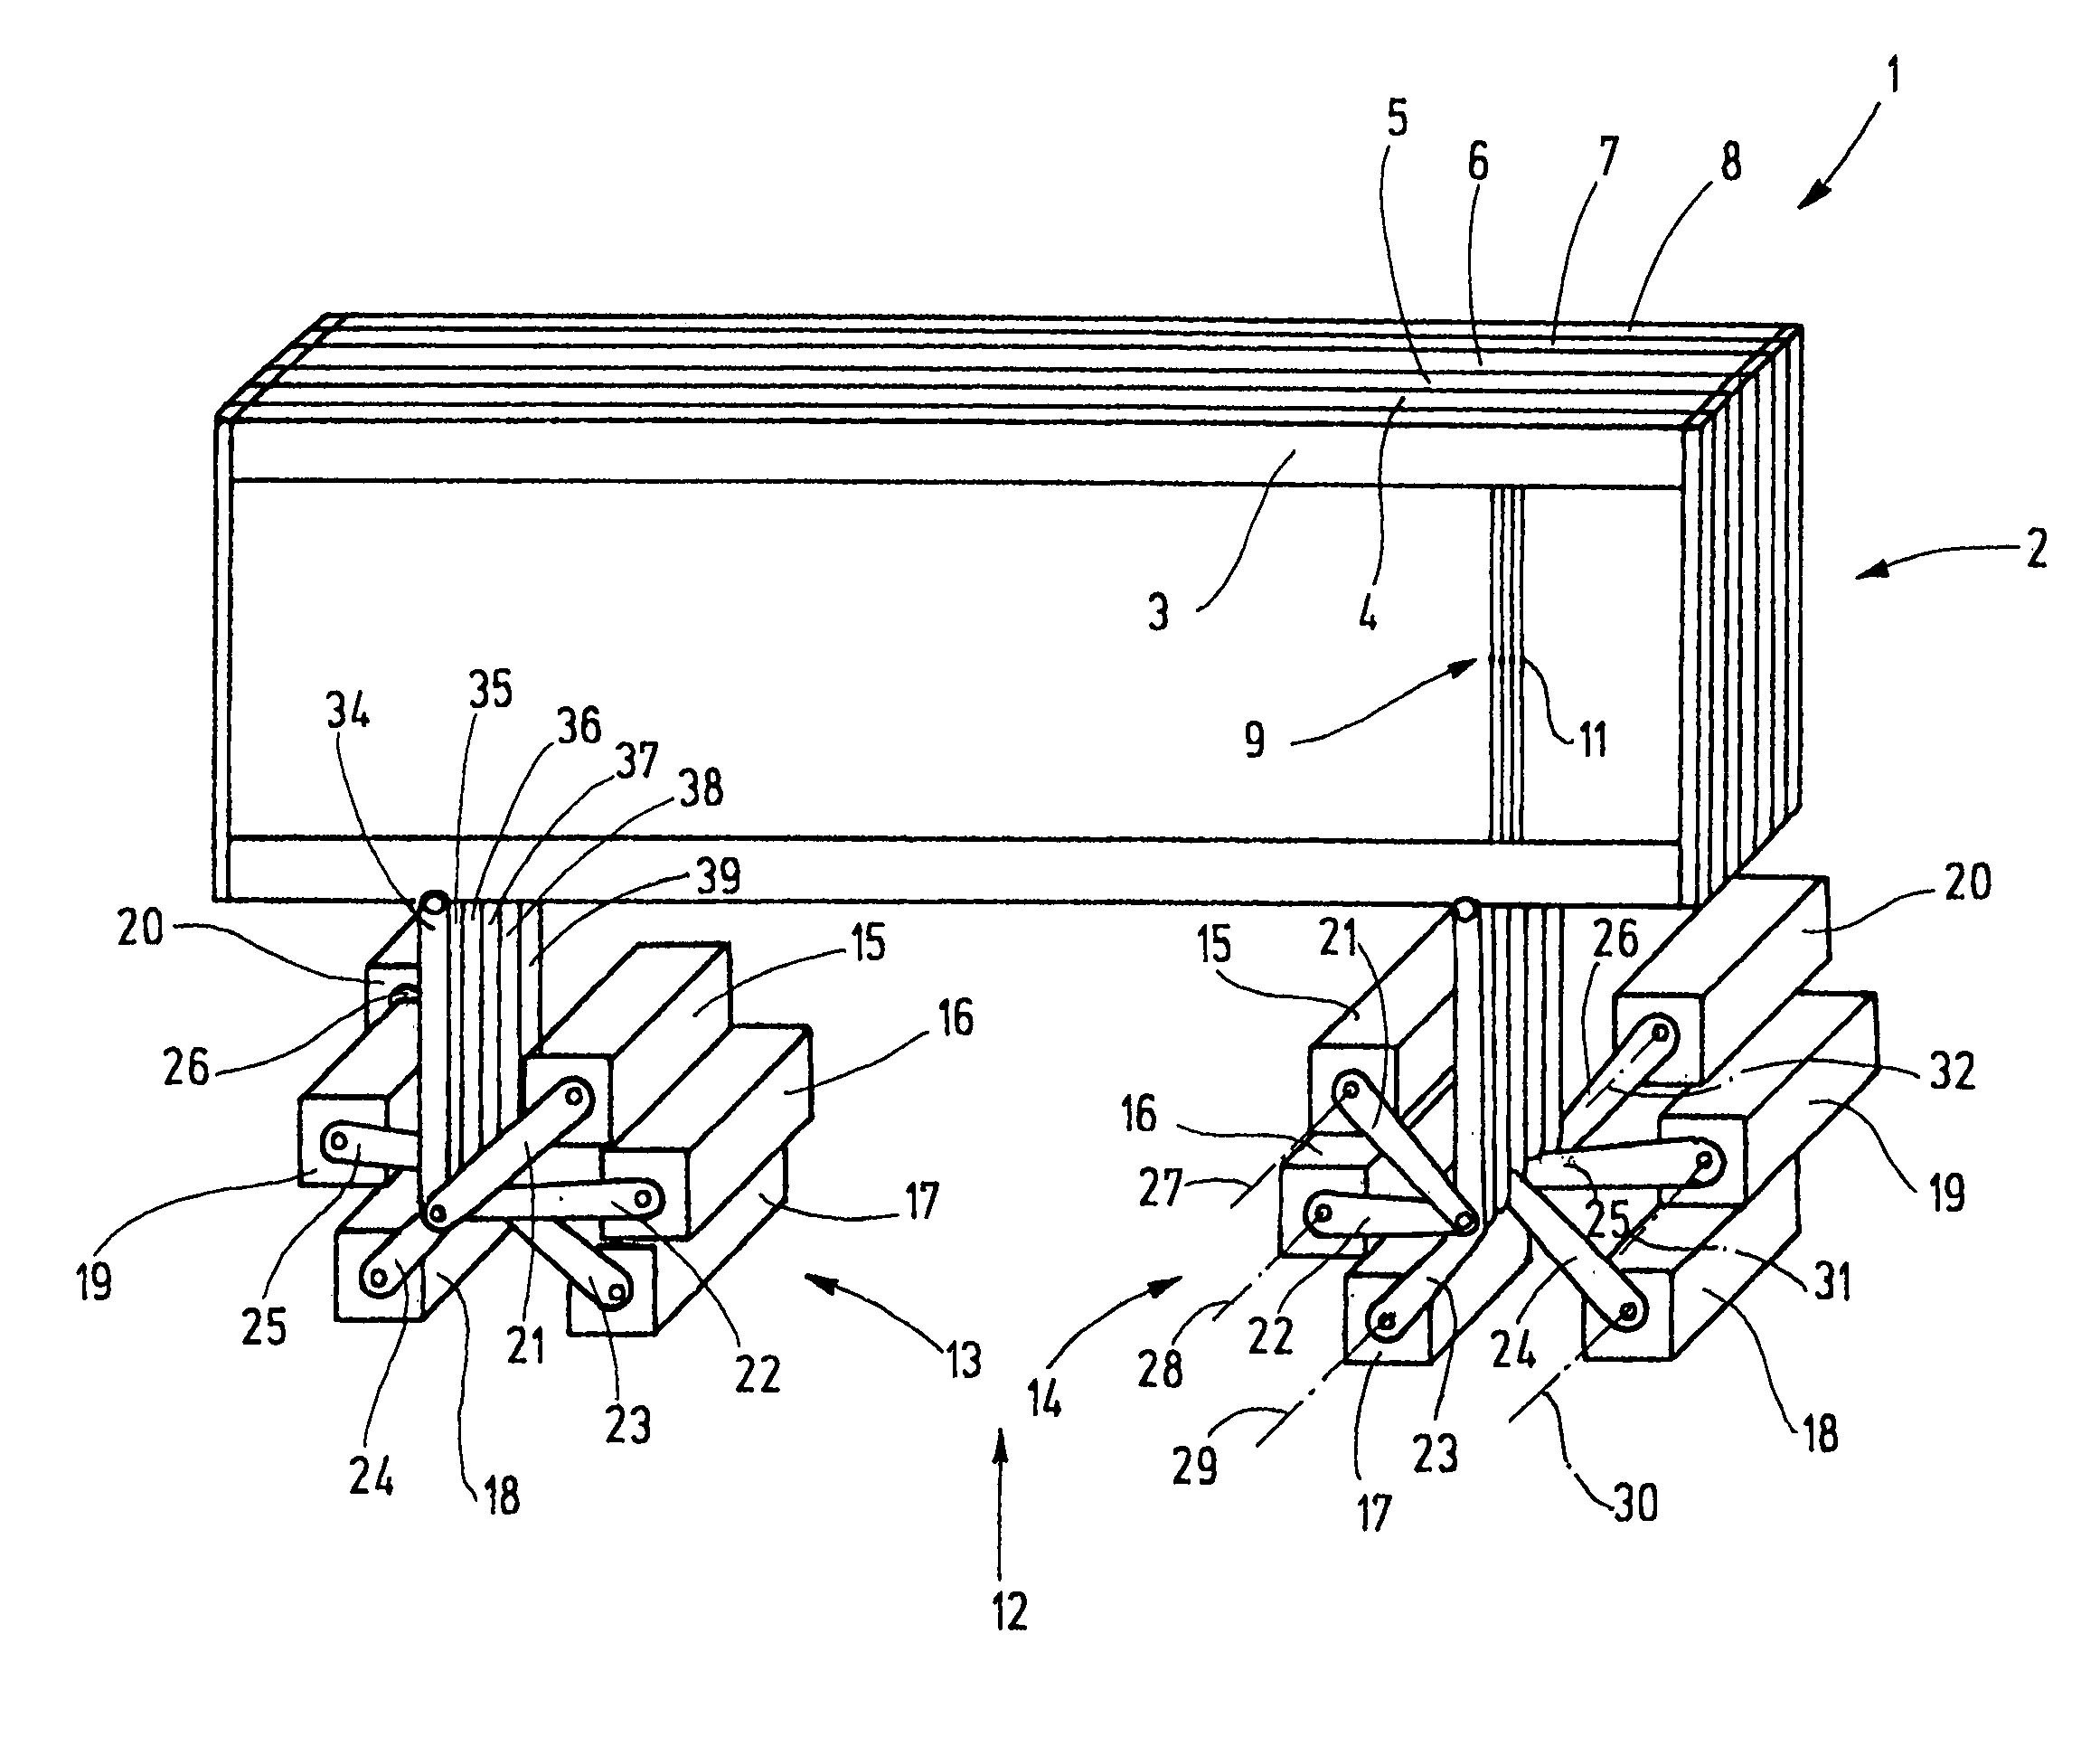 Shed-forming device for a power loom